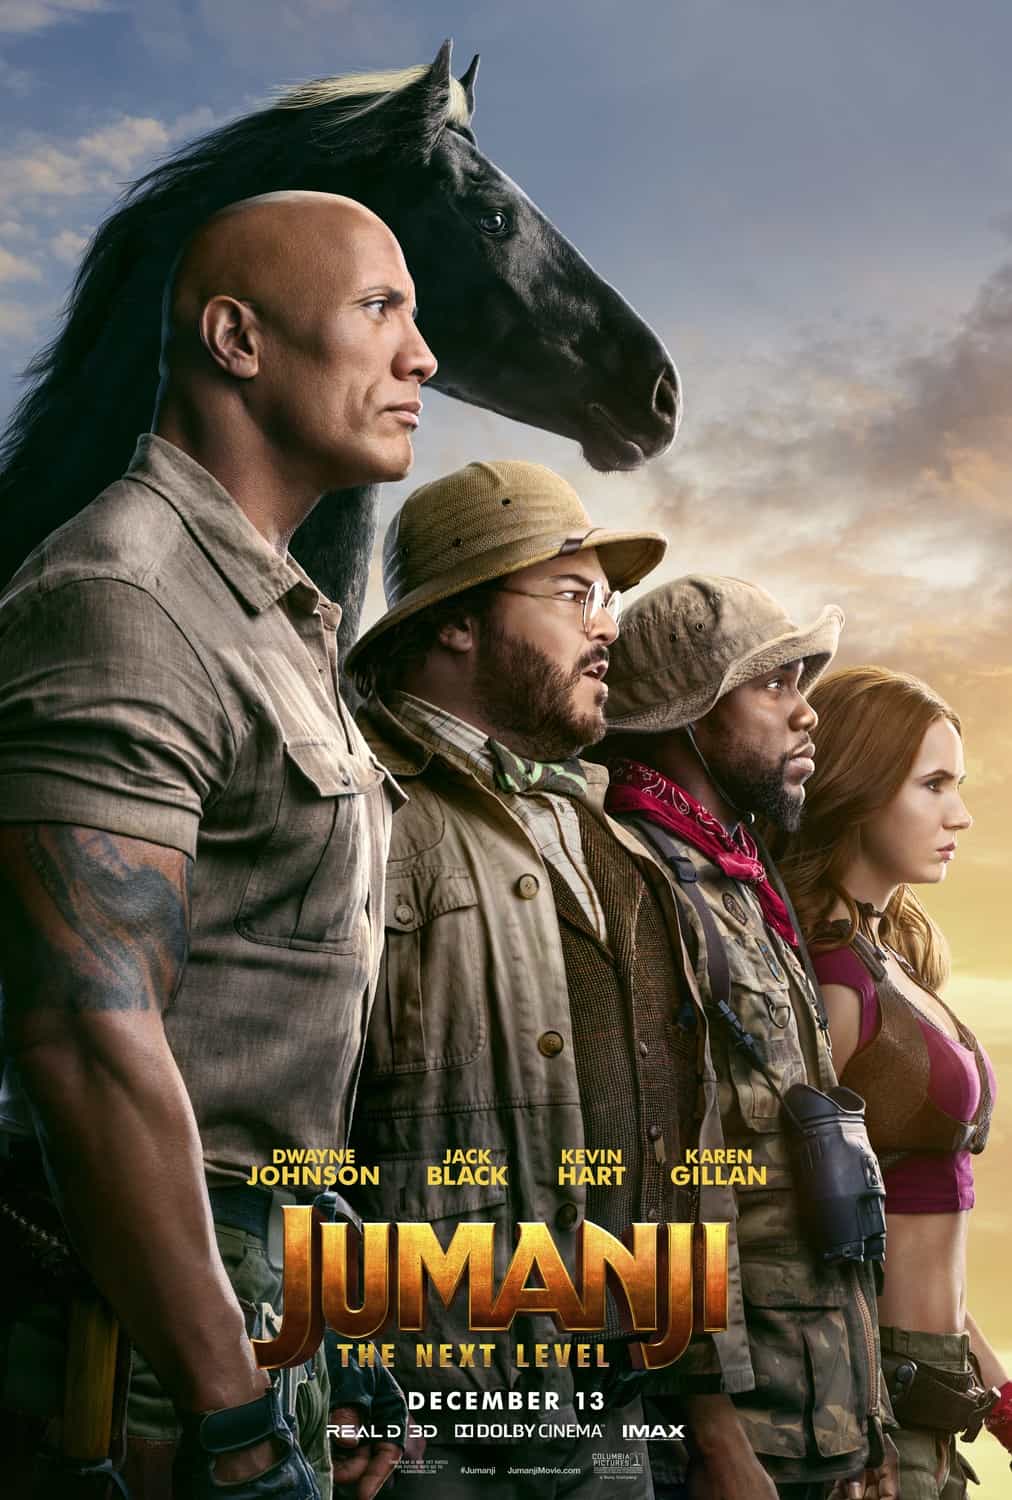 UK box office preview for weekend Friday, 13th December 2019 -  Jumanji: The Next Level and Black Christmas